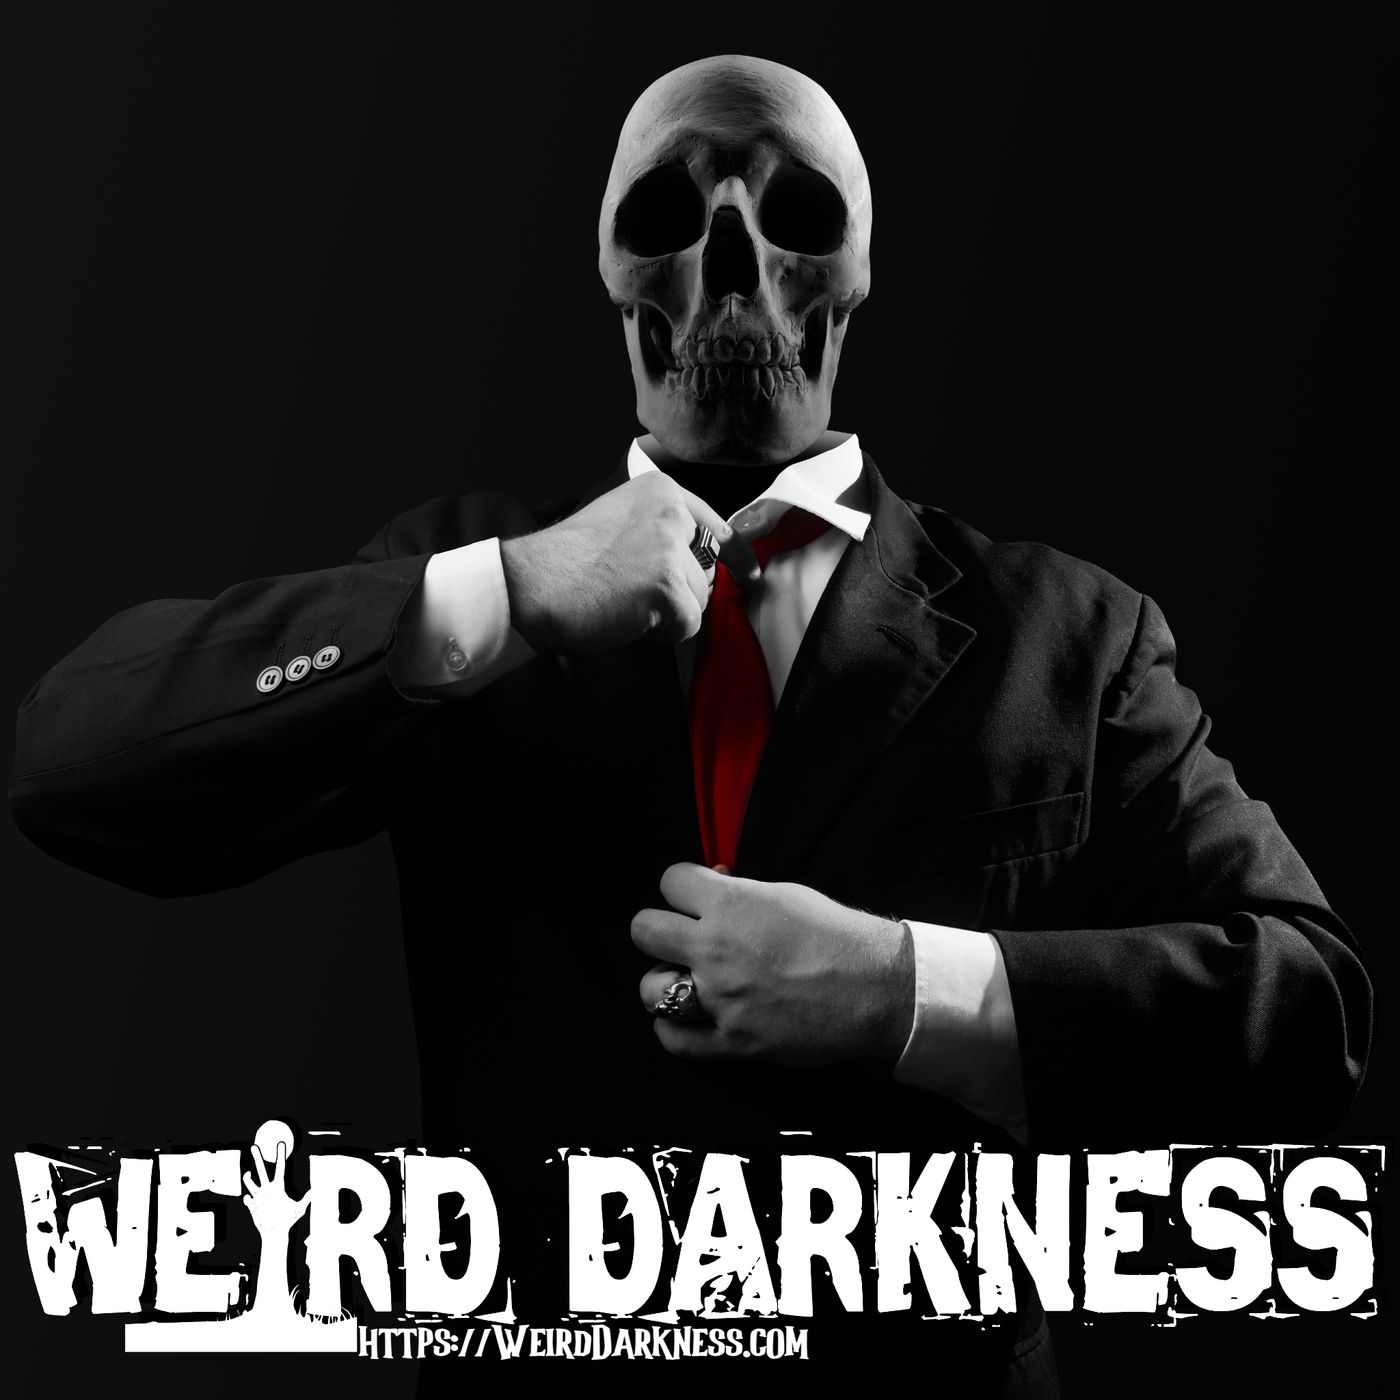 “THE POLITICS OF THE ZOMBIE APOCALYPSE” and More Creepy True Tales! #WeirdDarkness